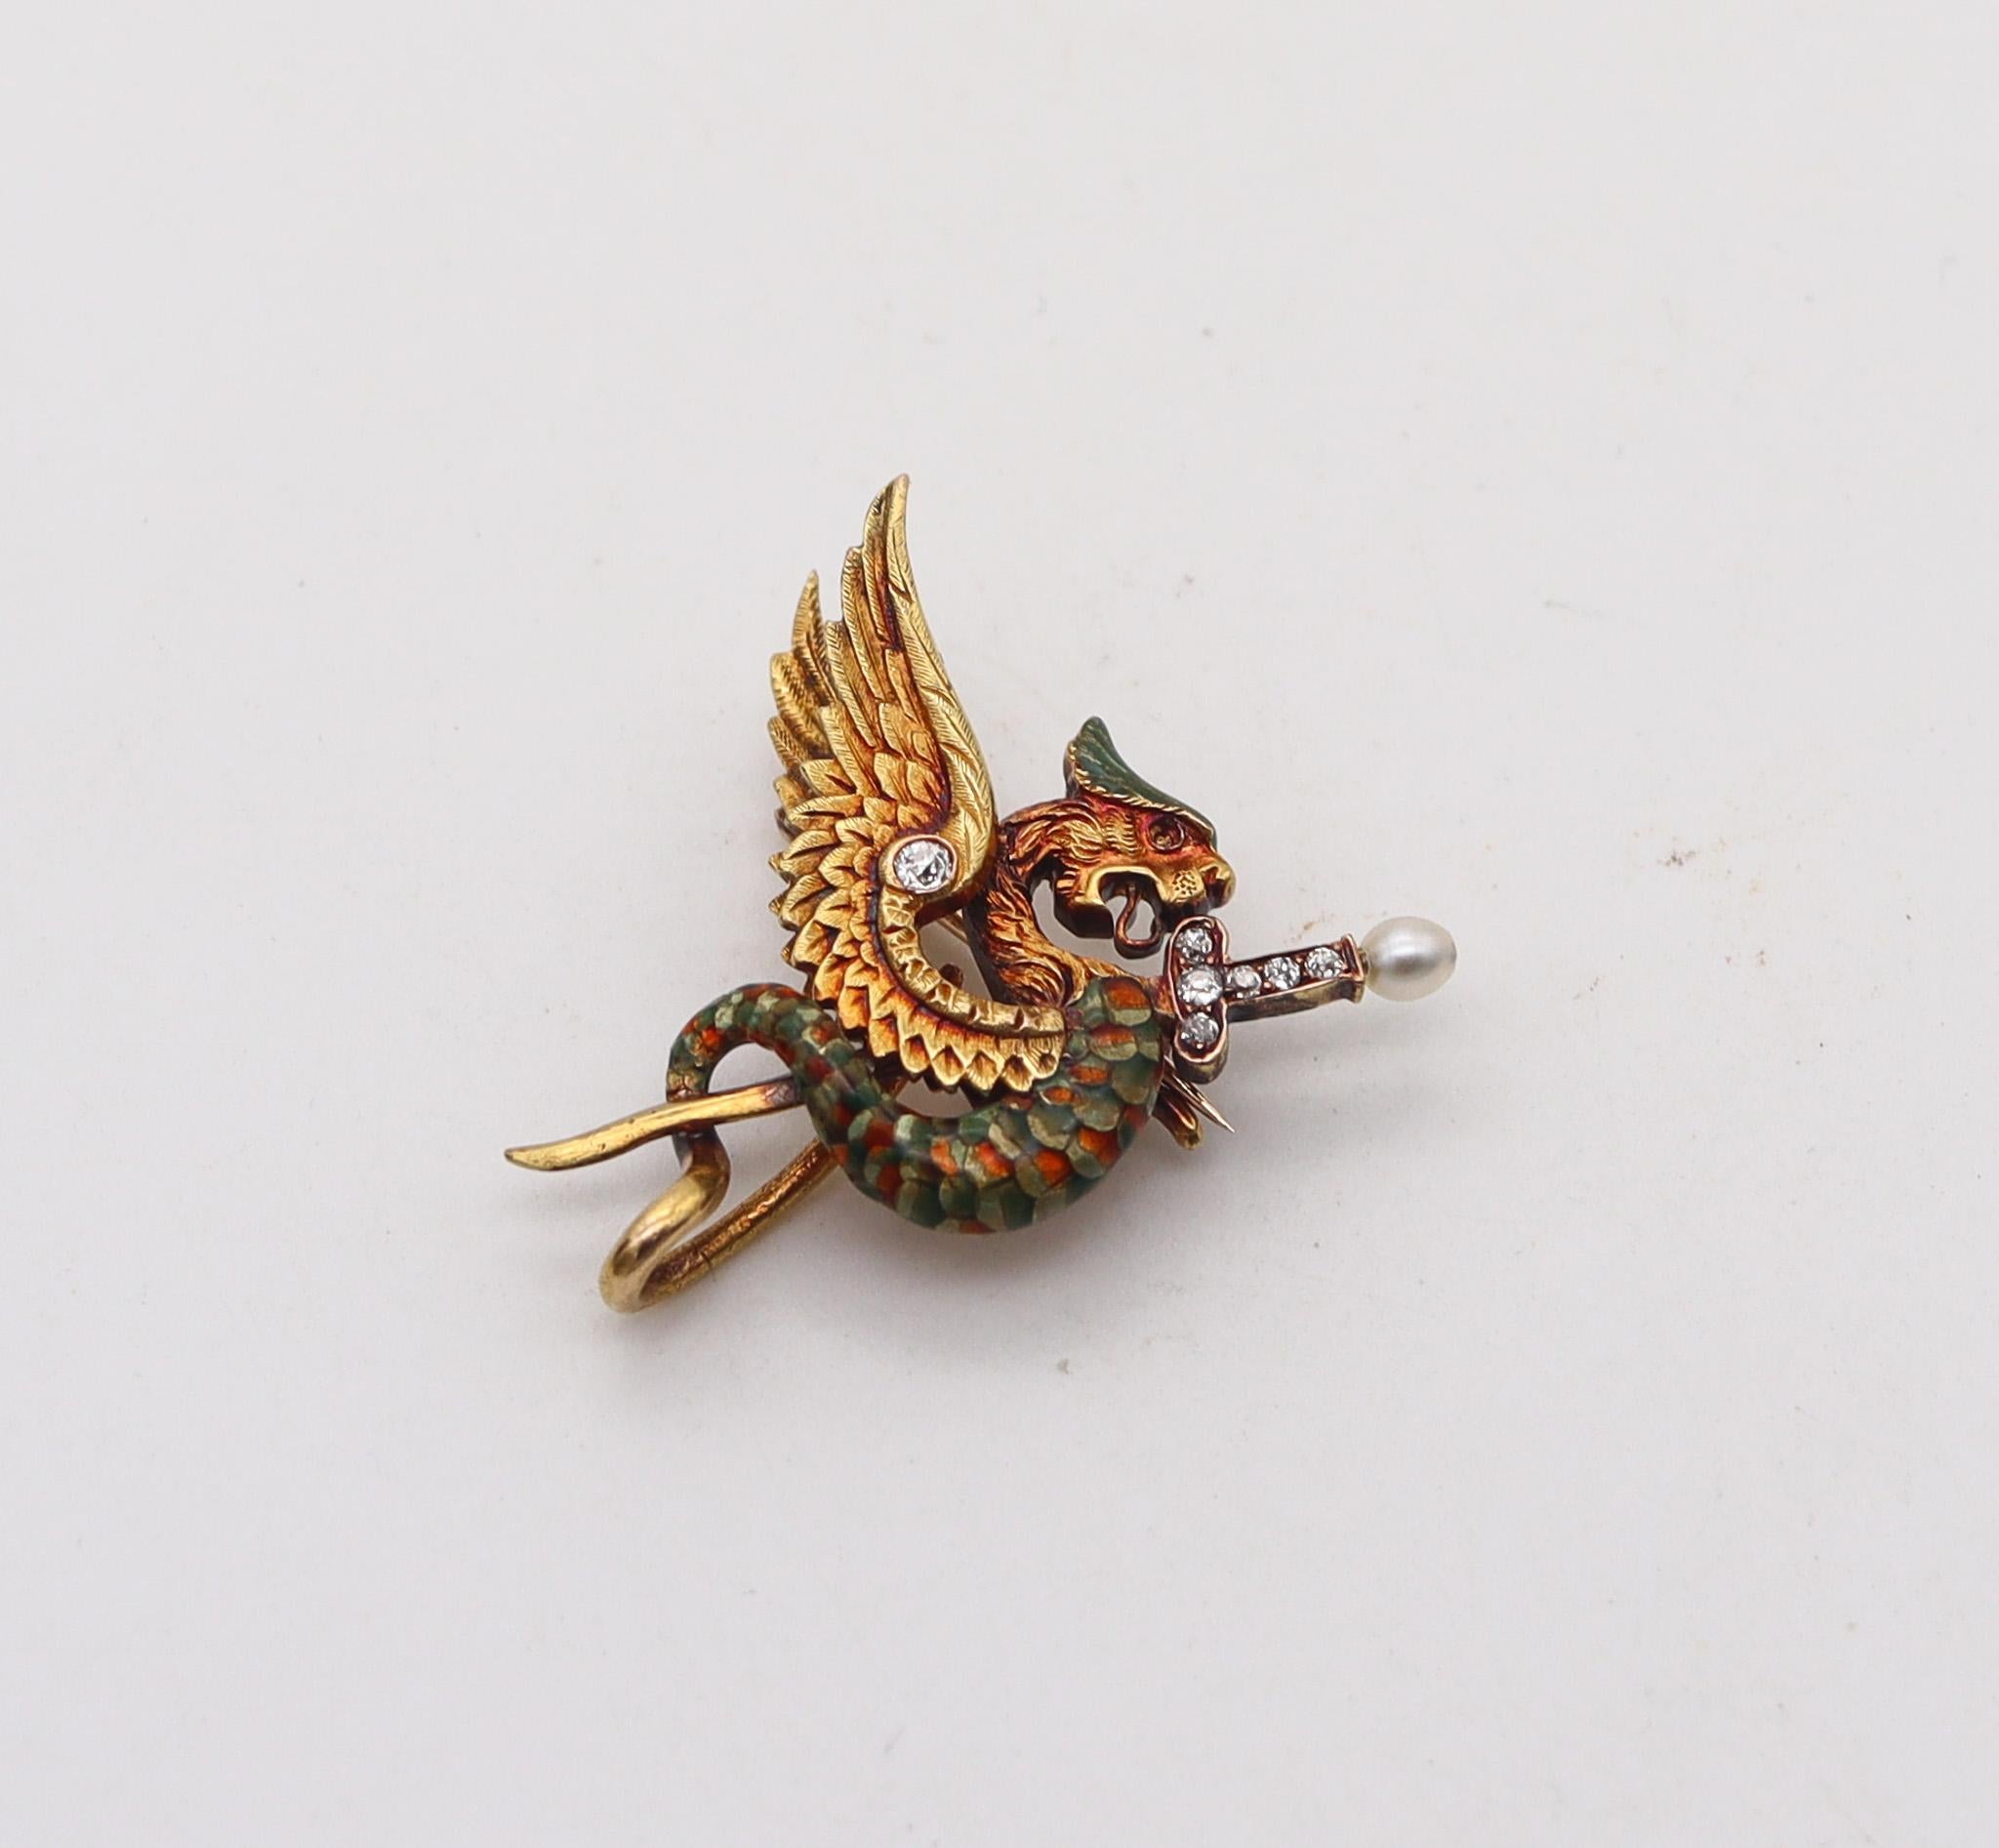 A Victorian neo-gothic pendant Brooch with a winged Griffin.

Fabulous pendant-brooch, created in England during the Victorian era in the late 19th century, circa 1870. This piece was crafted in three dimensions with great details in solid yellow